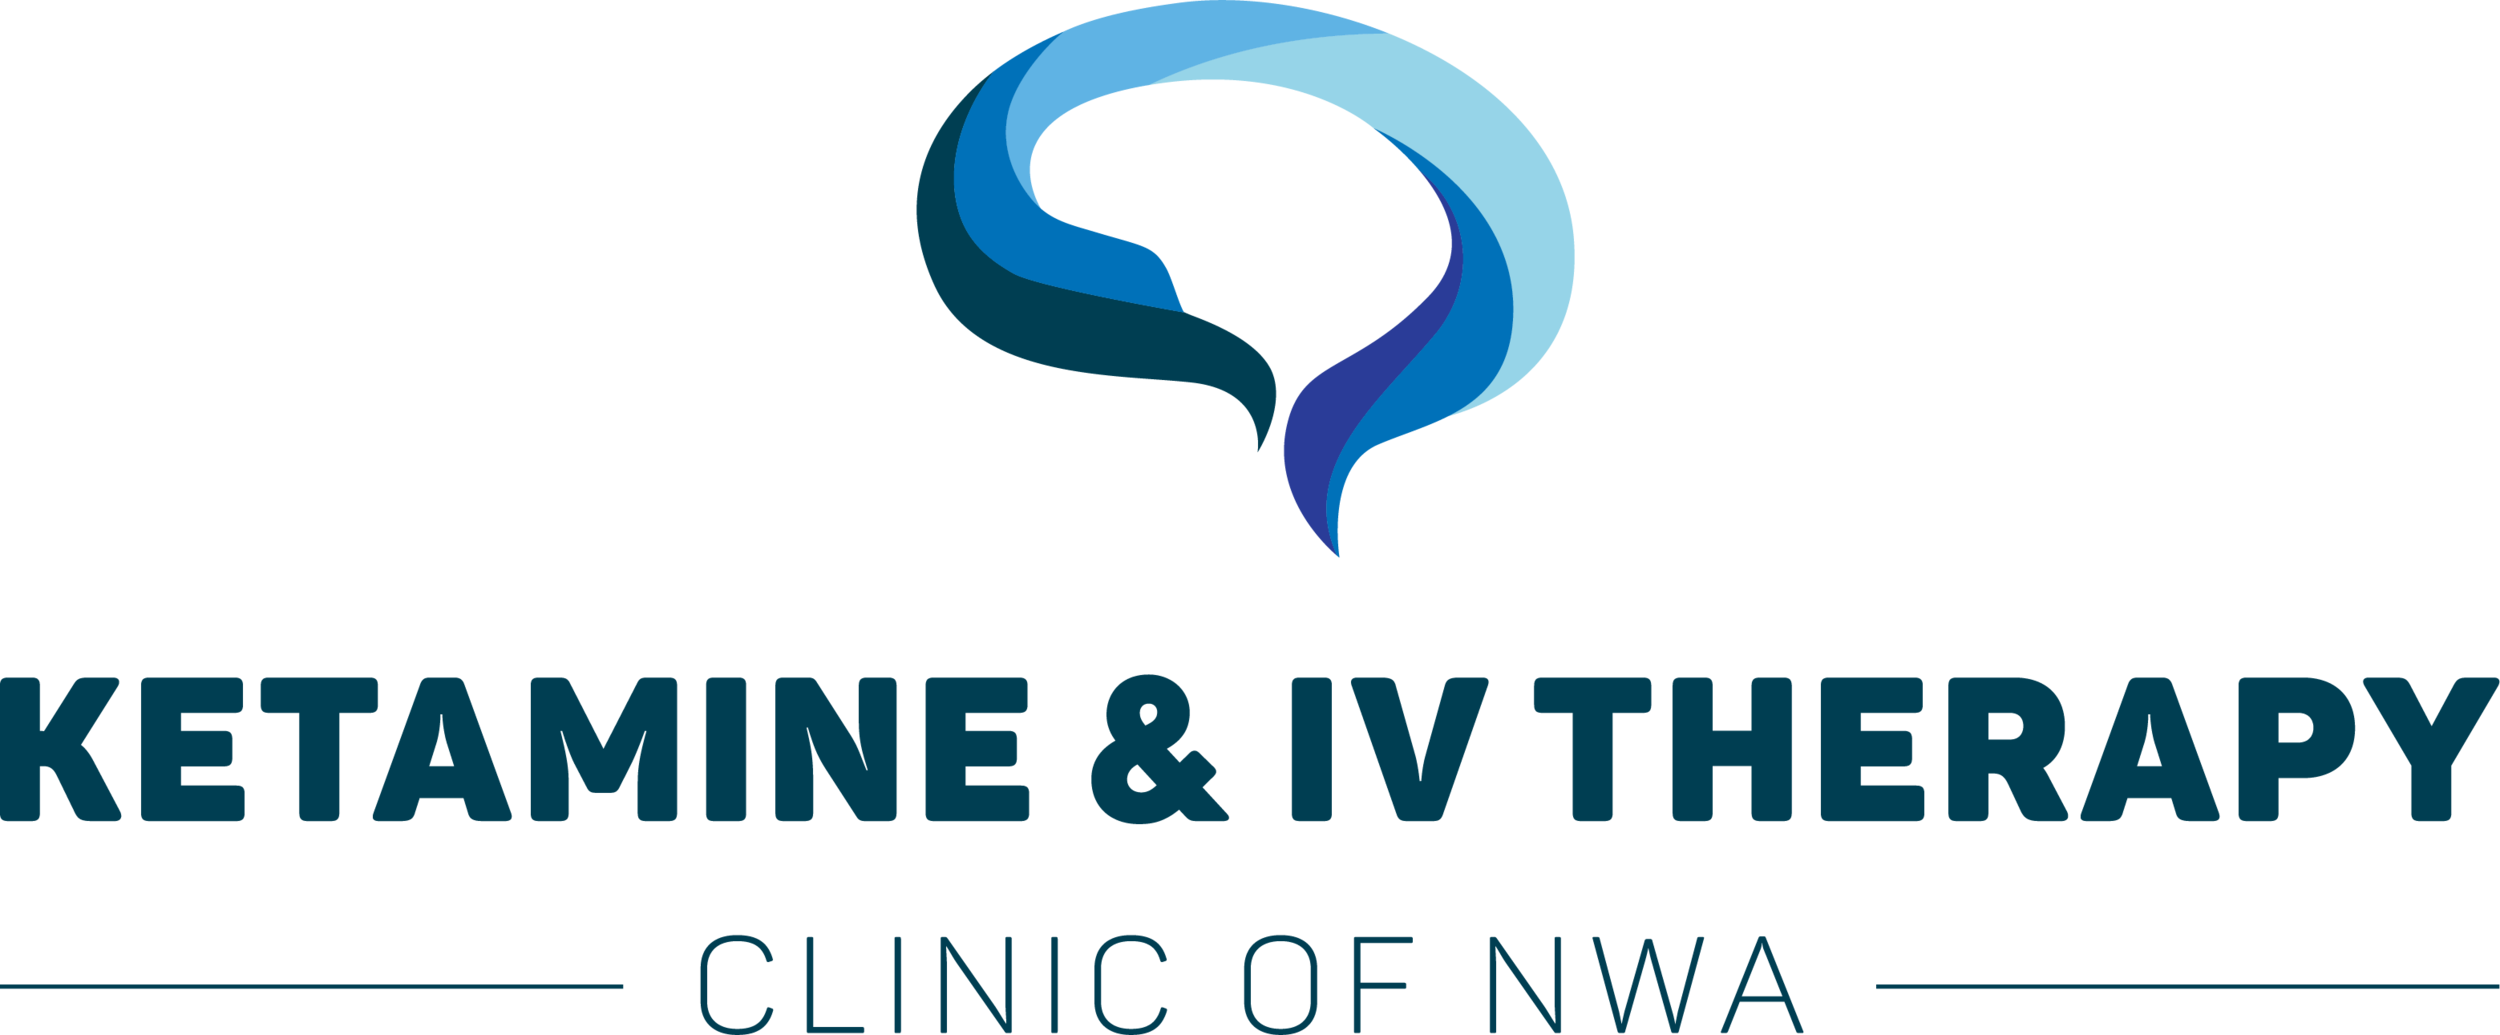 Ketamine and IV Therapy Clinic of NWA